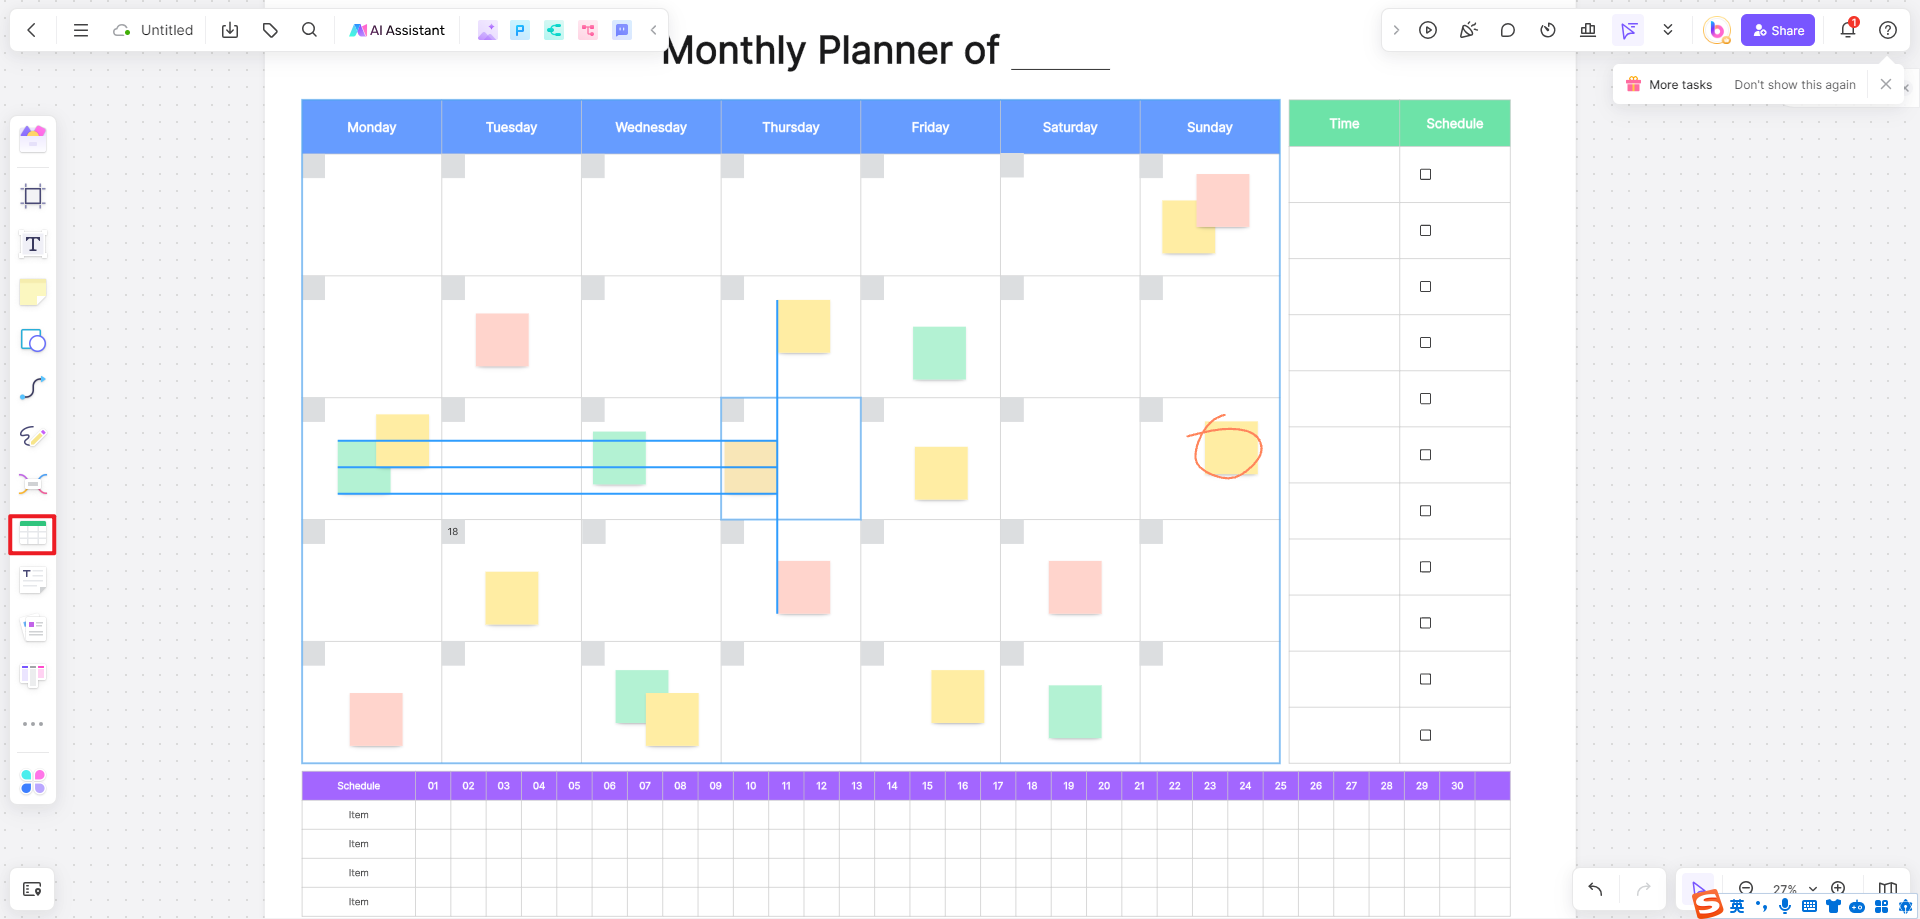 process-of-customizing-your-monthly-planner-on-boardmix-2.png